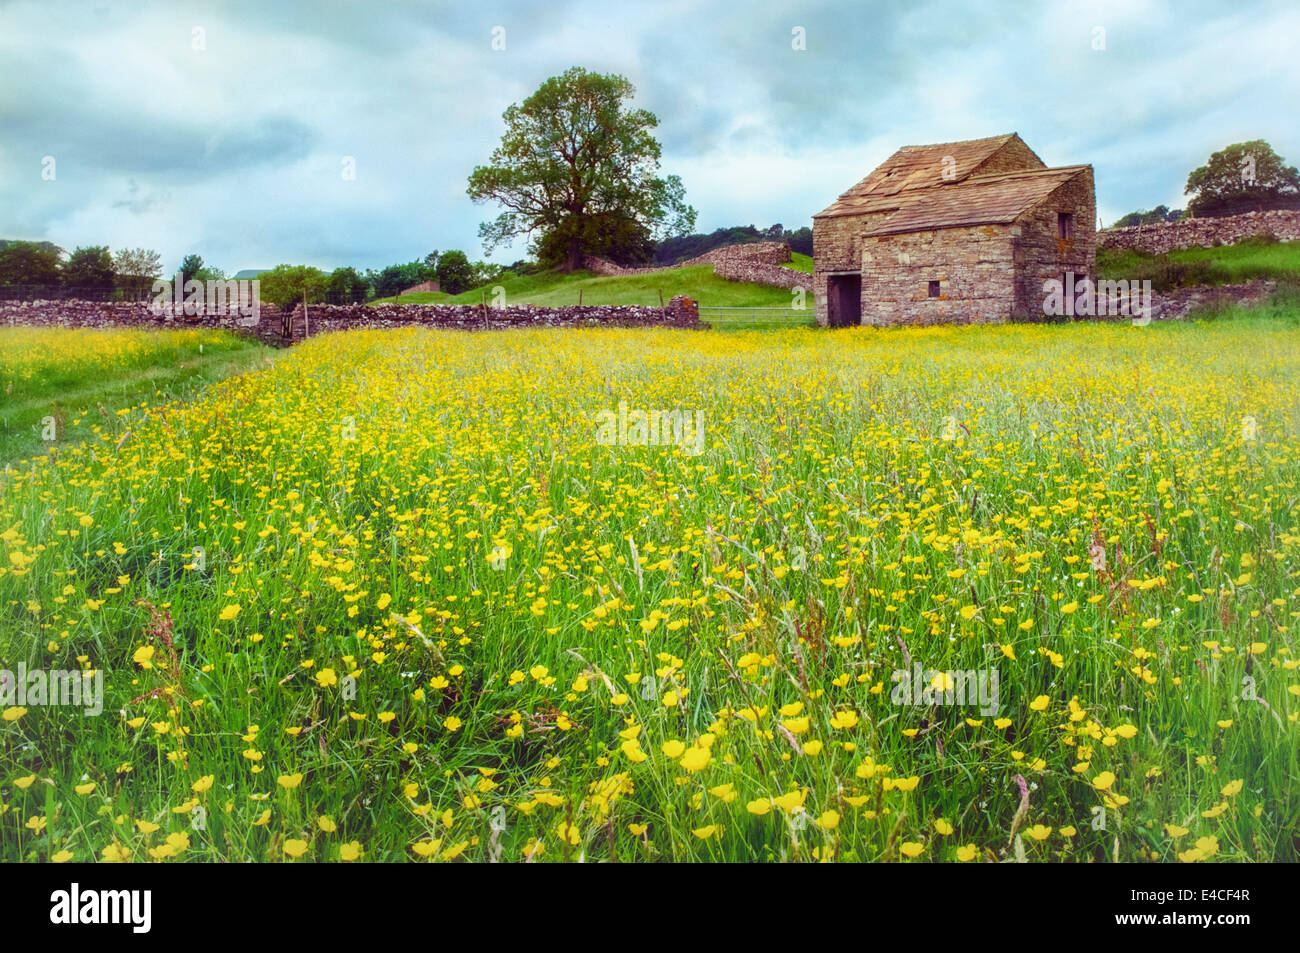 Field of grass and buttercups with a stone barn and dry stone walls in Yorkshire Stock Photo